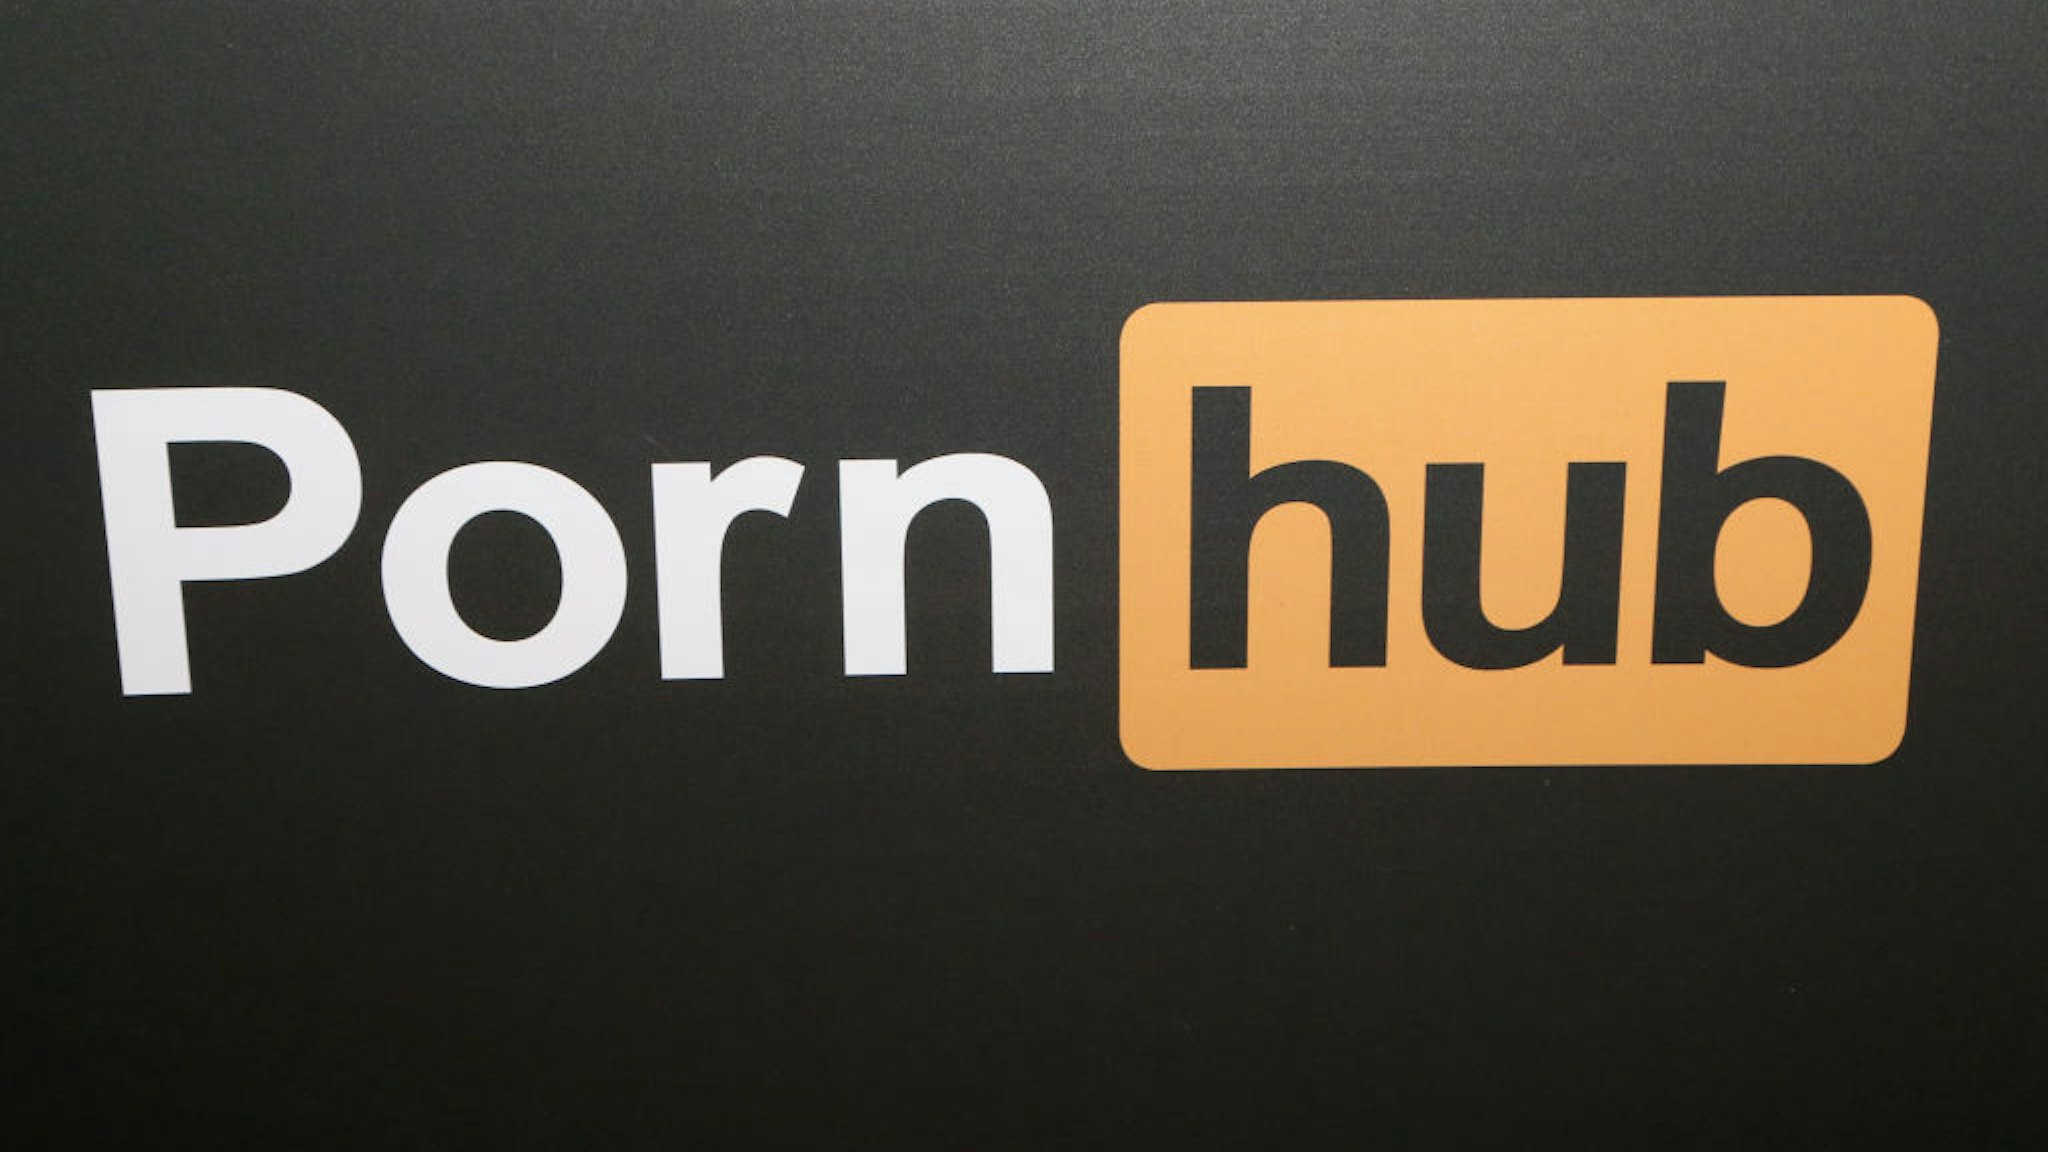 LAS VEGAS, NV - JANUARY 25: A Pornhub logo is displayed at the company's booth during the 2018 AVN Adult Expo at the Hard Rock Hotel &amp; Casino on January 25, 2018 in Las Vegas, Nevada. (Photo by Gabe Ginsberg/FilmMagic)